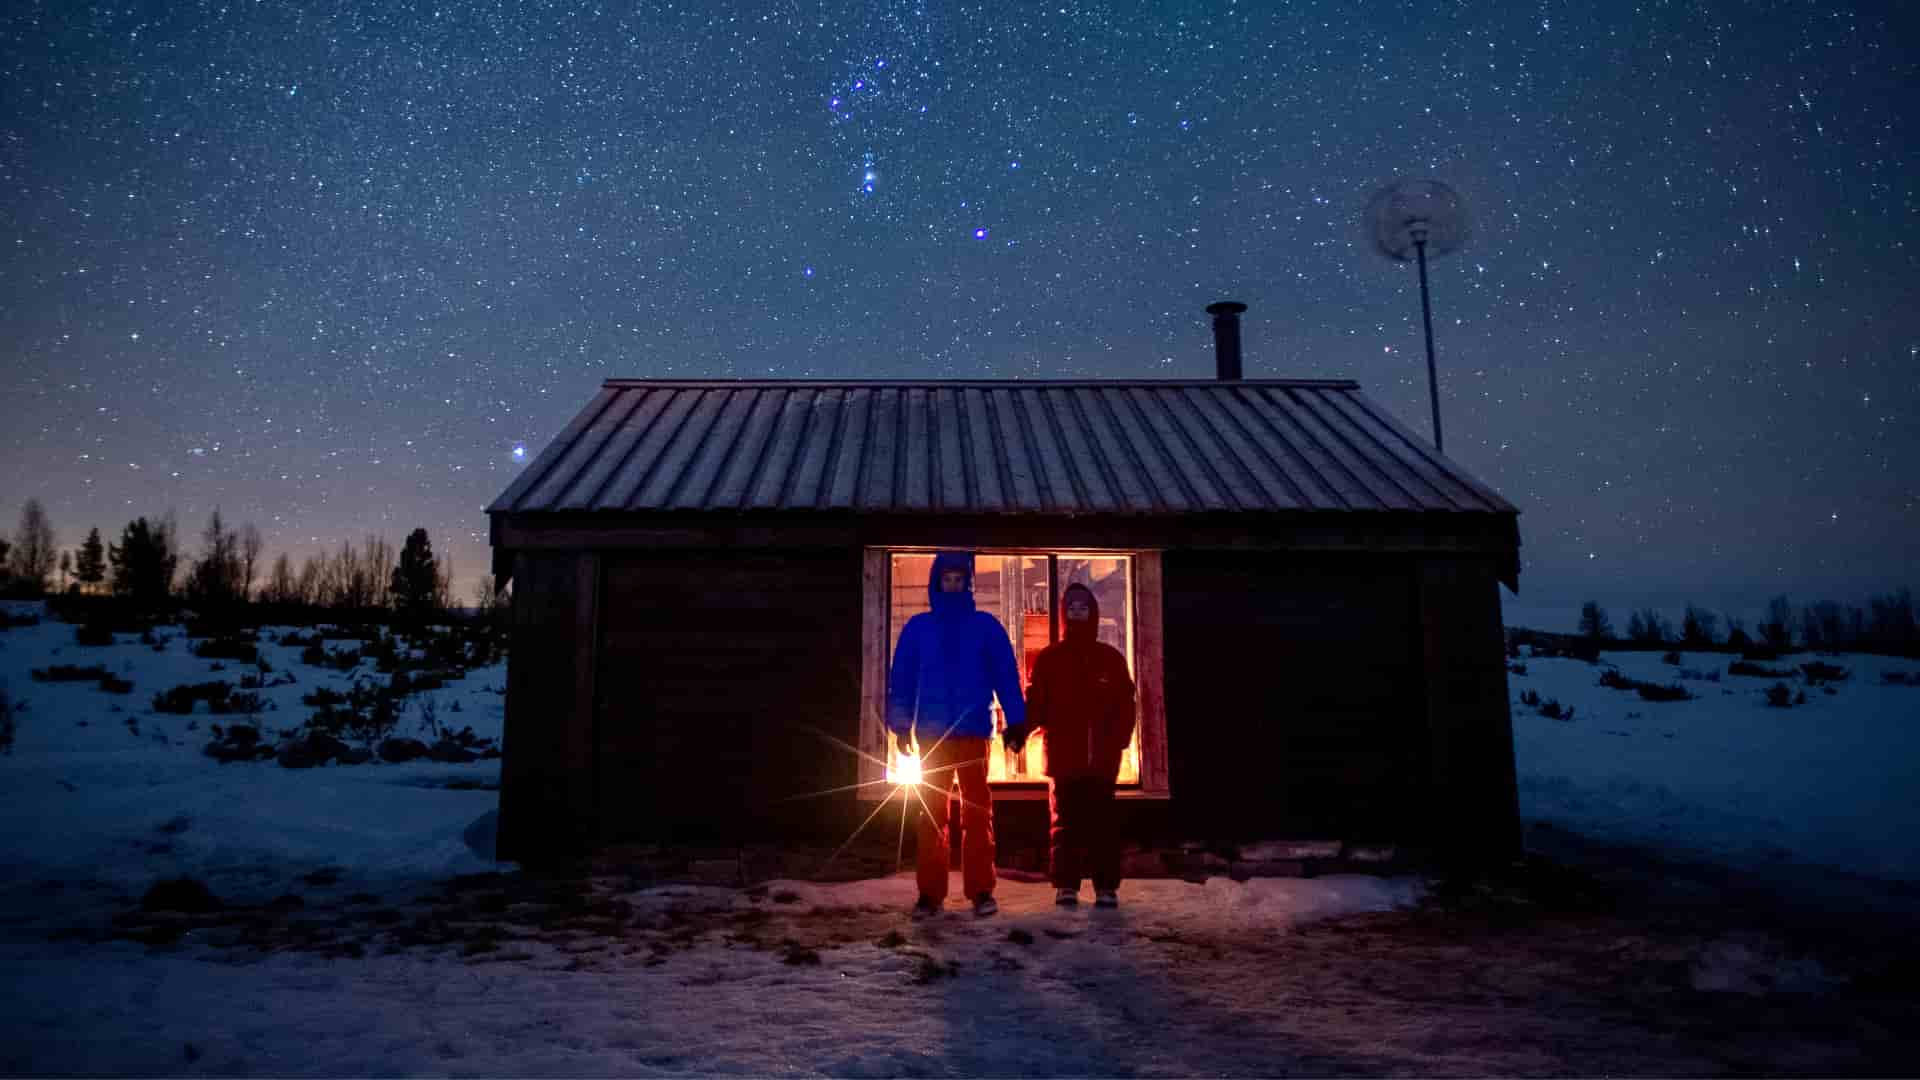 Old cabin in snow and star lighted sky.